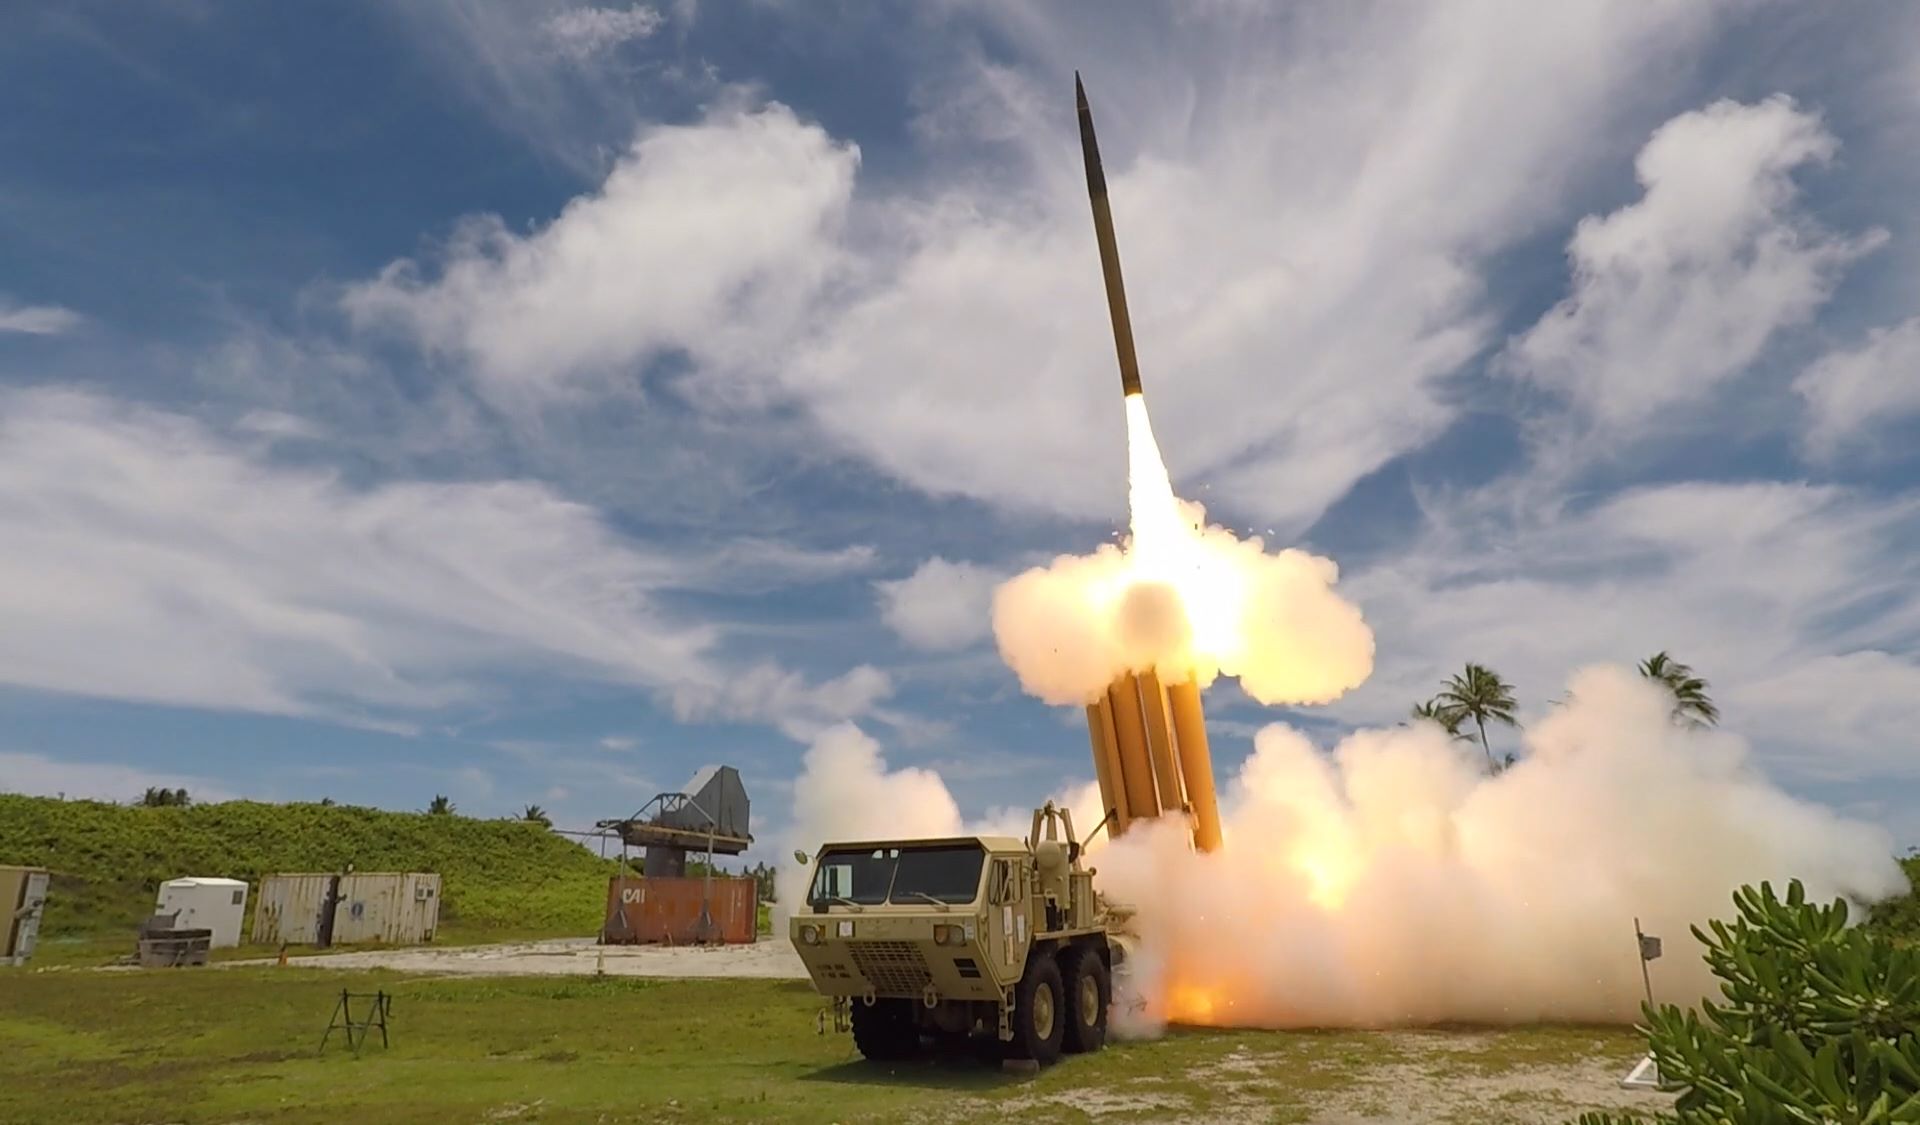 Saudi Arabia bought the best American THAAD air defense system for $15 billion and will prepare four sites for them by 2026